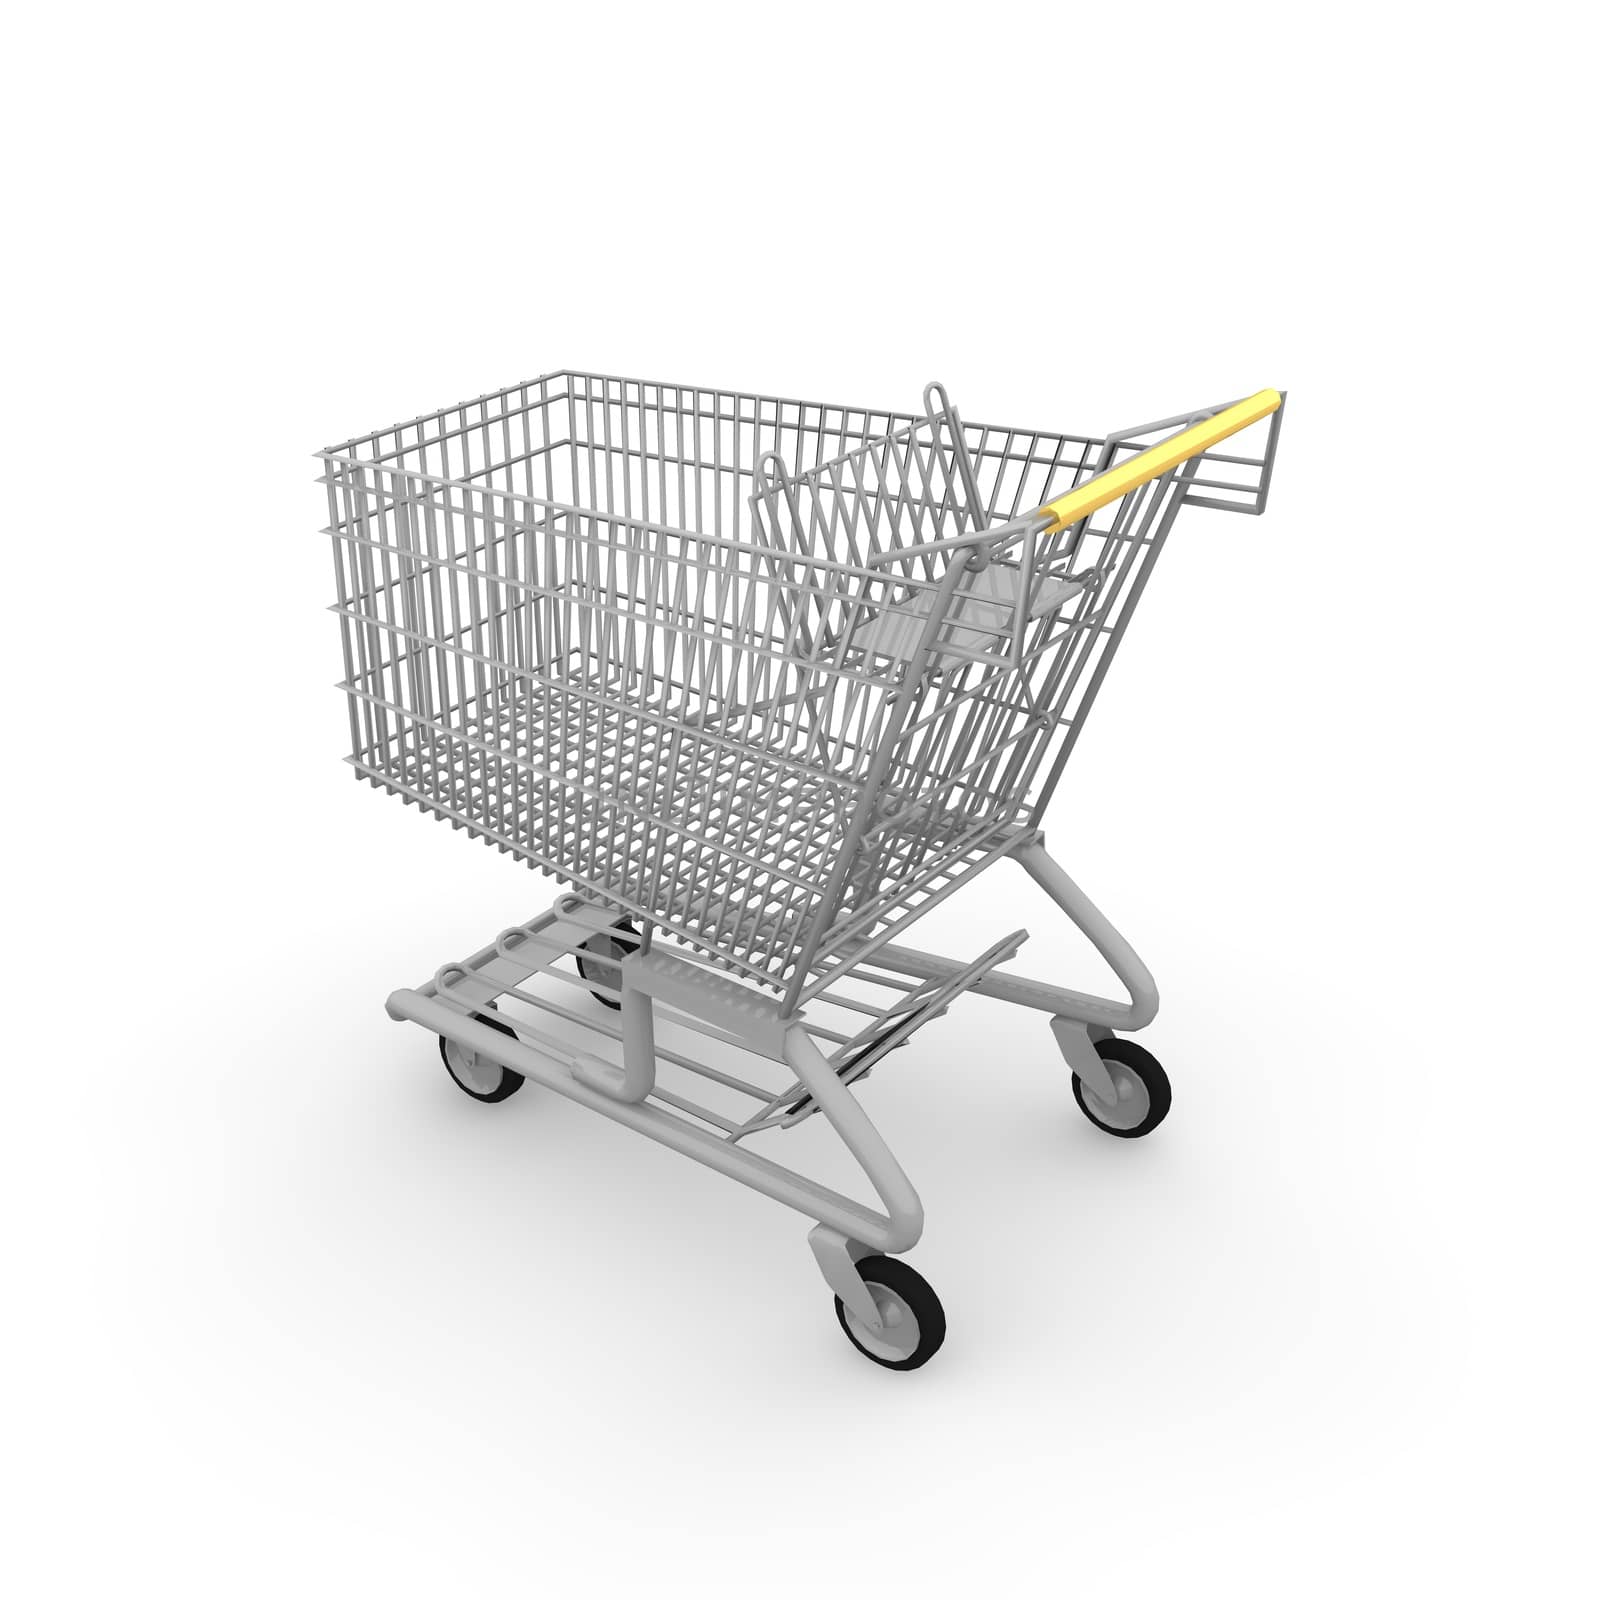 Shopping cart made ������of gold is a wonderful windfall and very luxurious.